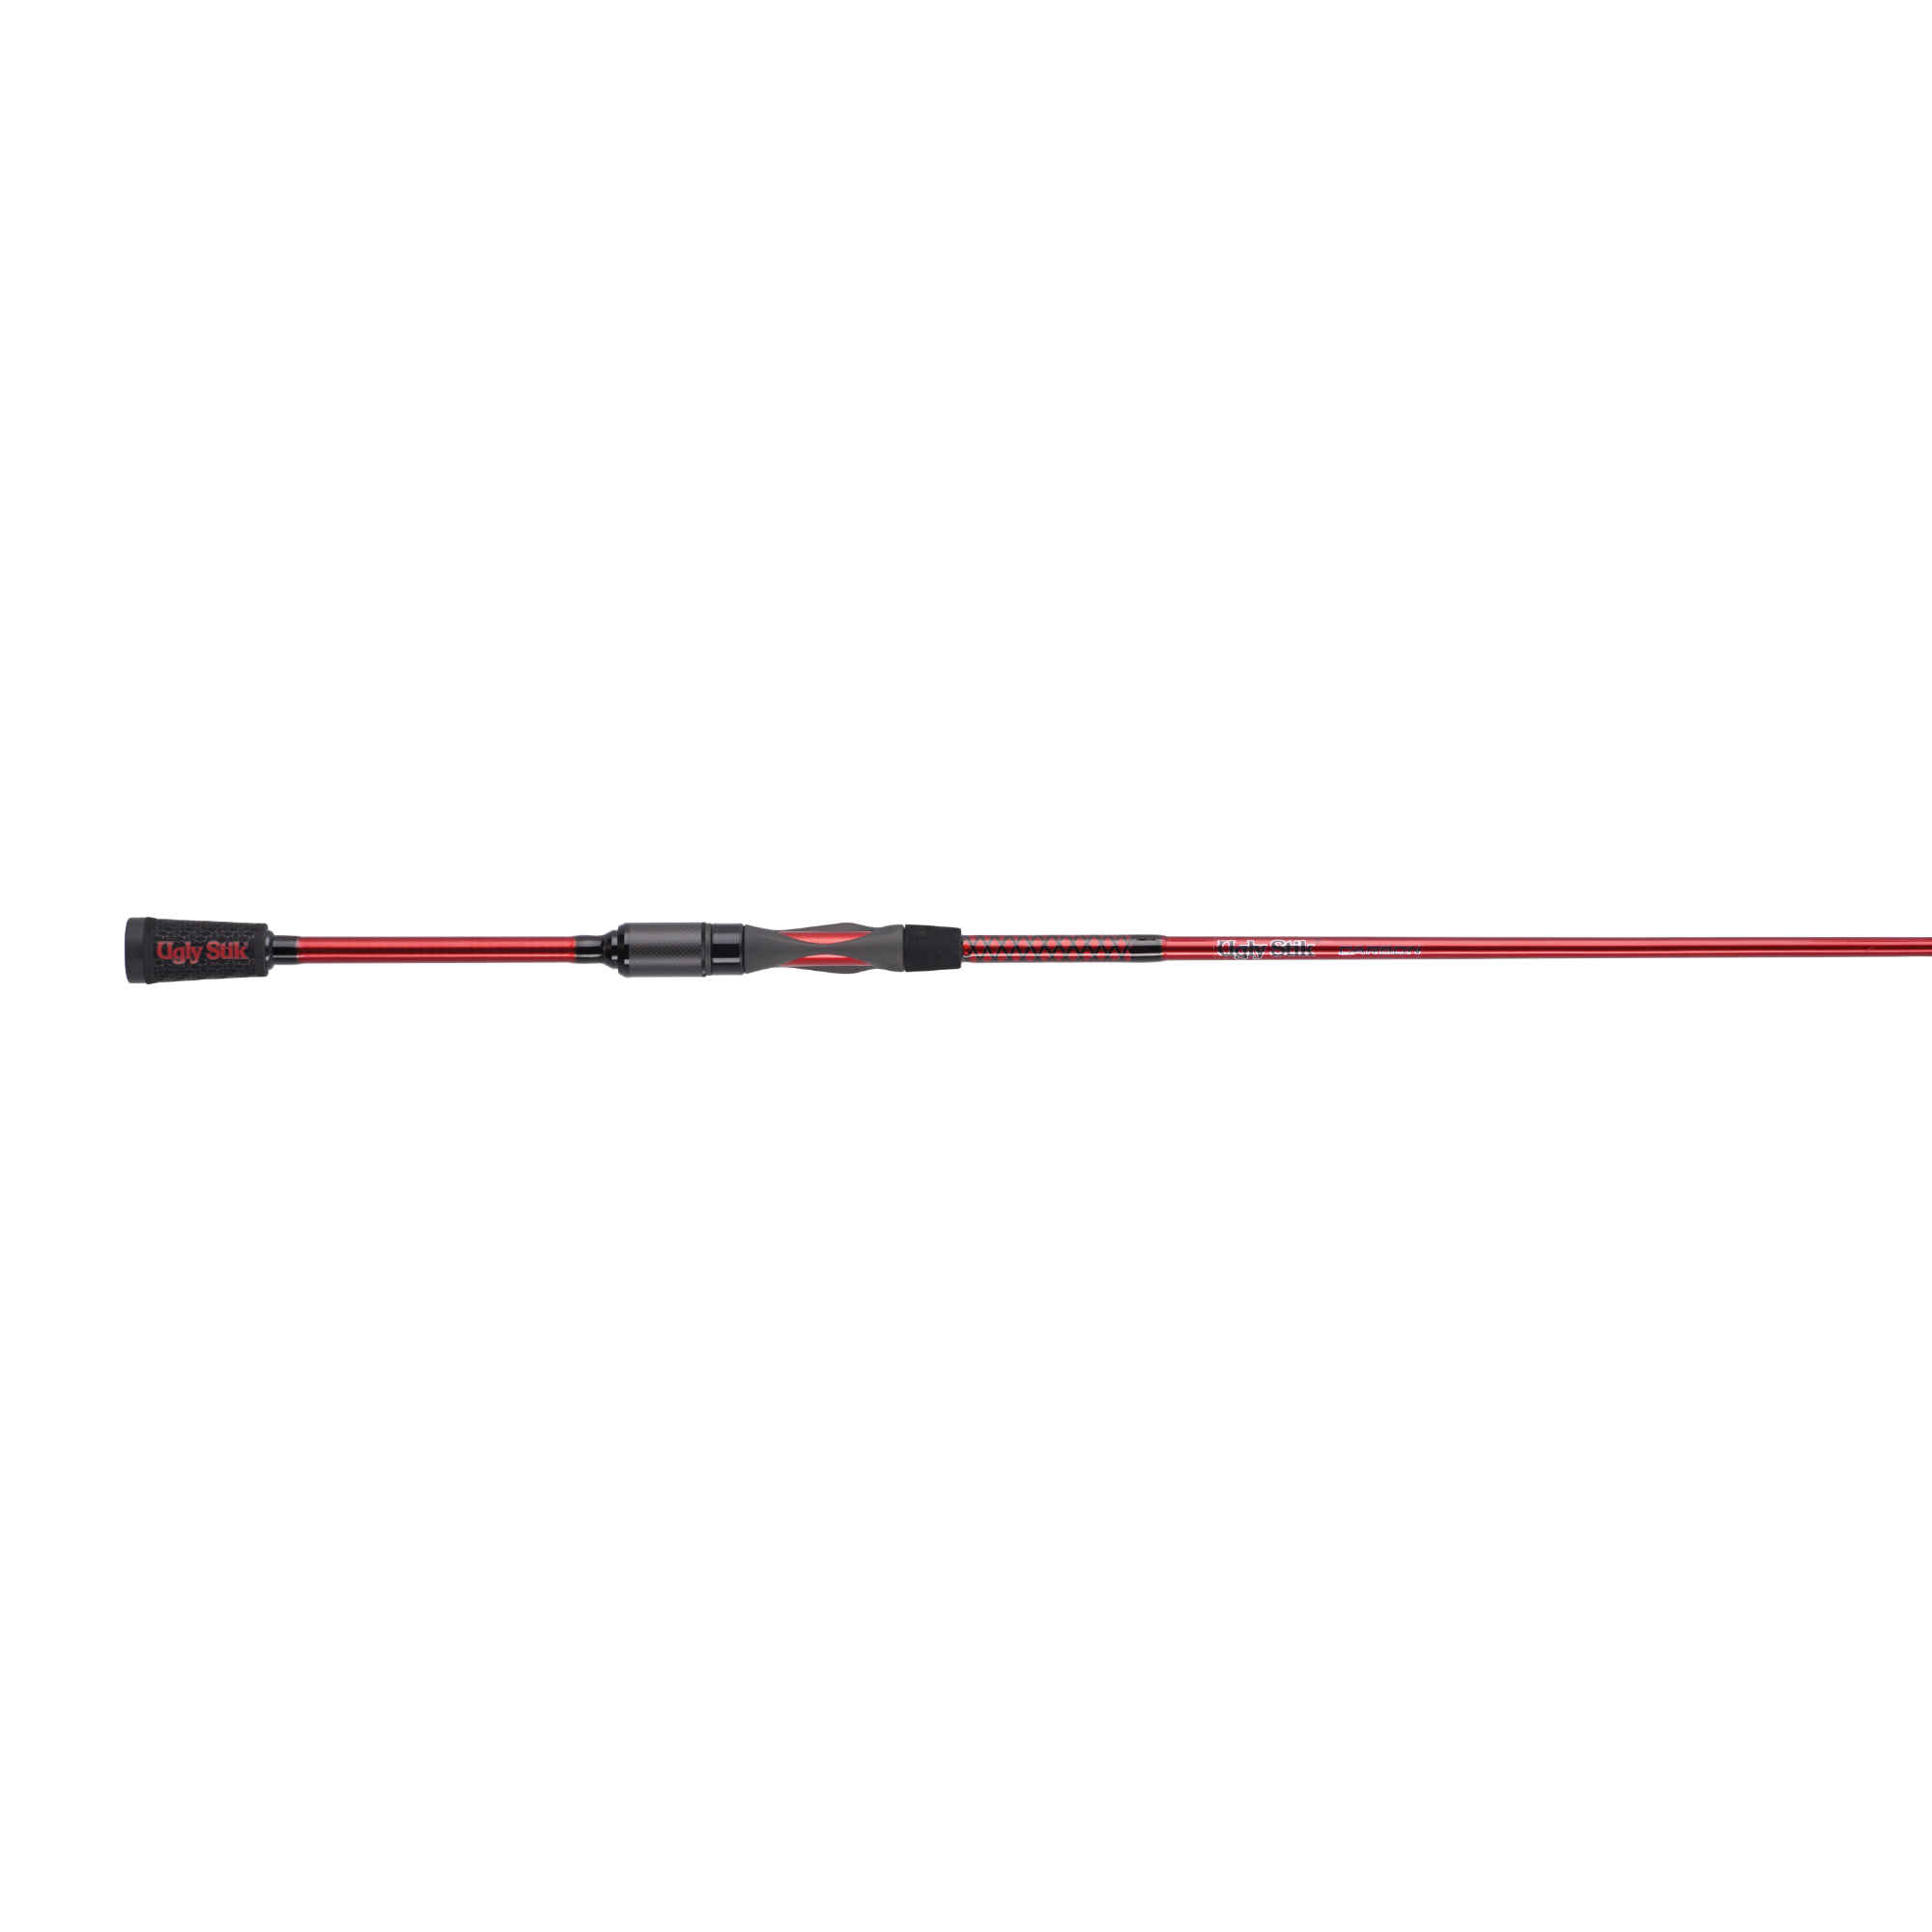 https://op2.0ps.us/original/opplanet-shakespeare-ugly-stik-carbon-spinning-rod-2-piece-ultra-light-moderate-8-guides-1-32-1-8oz-lures-70-uscbsp702ul-main